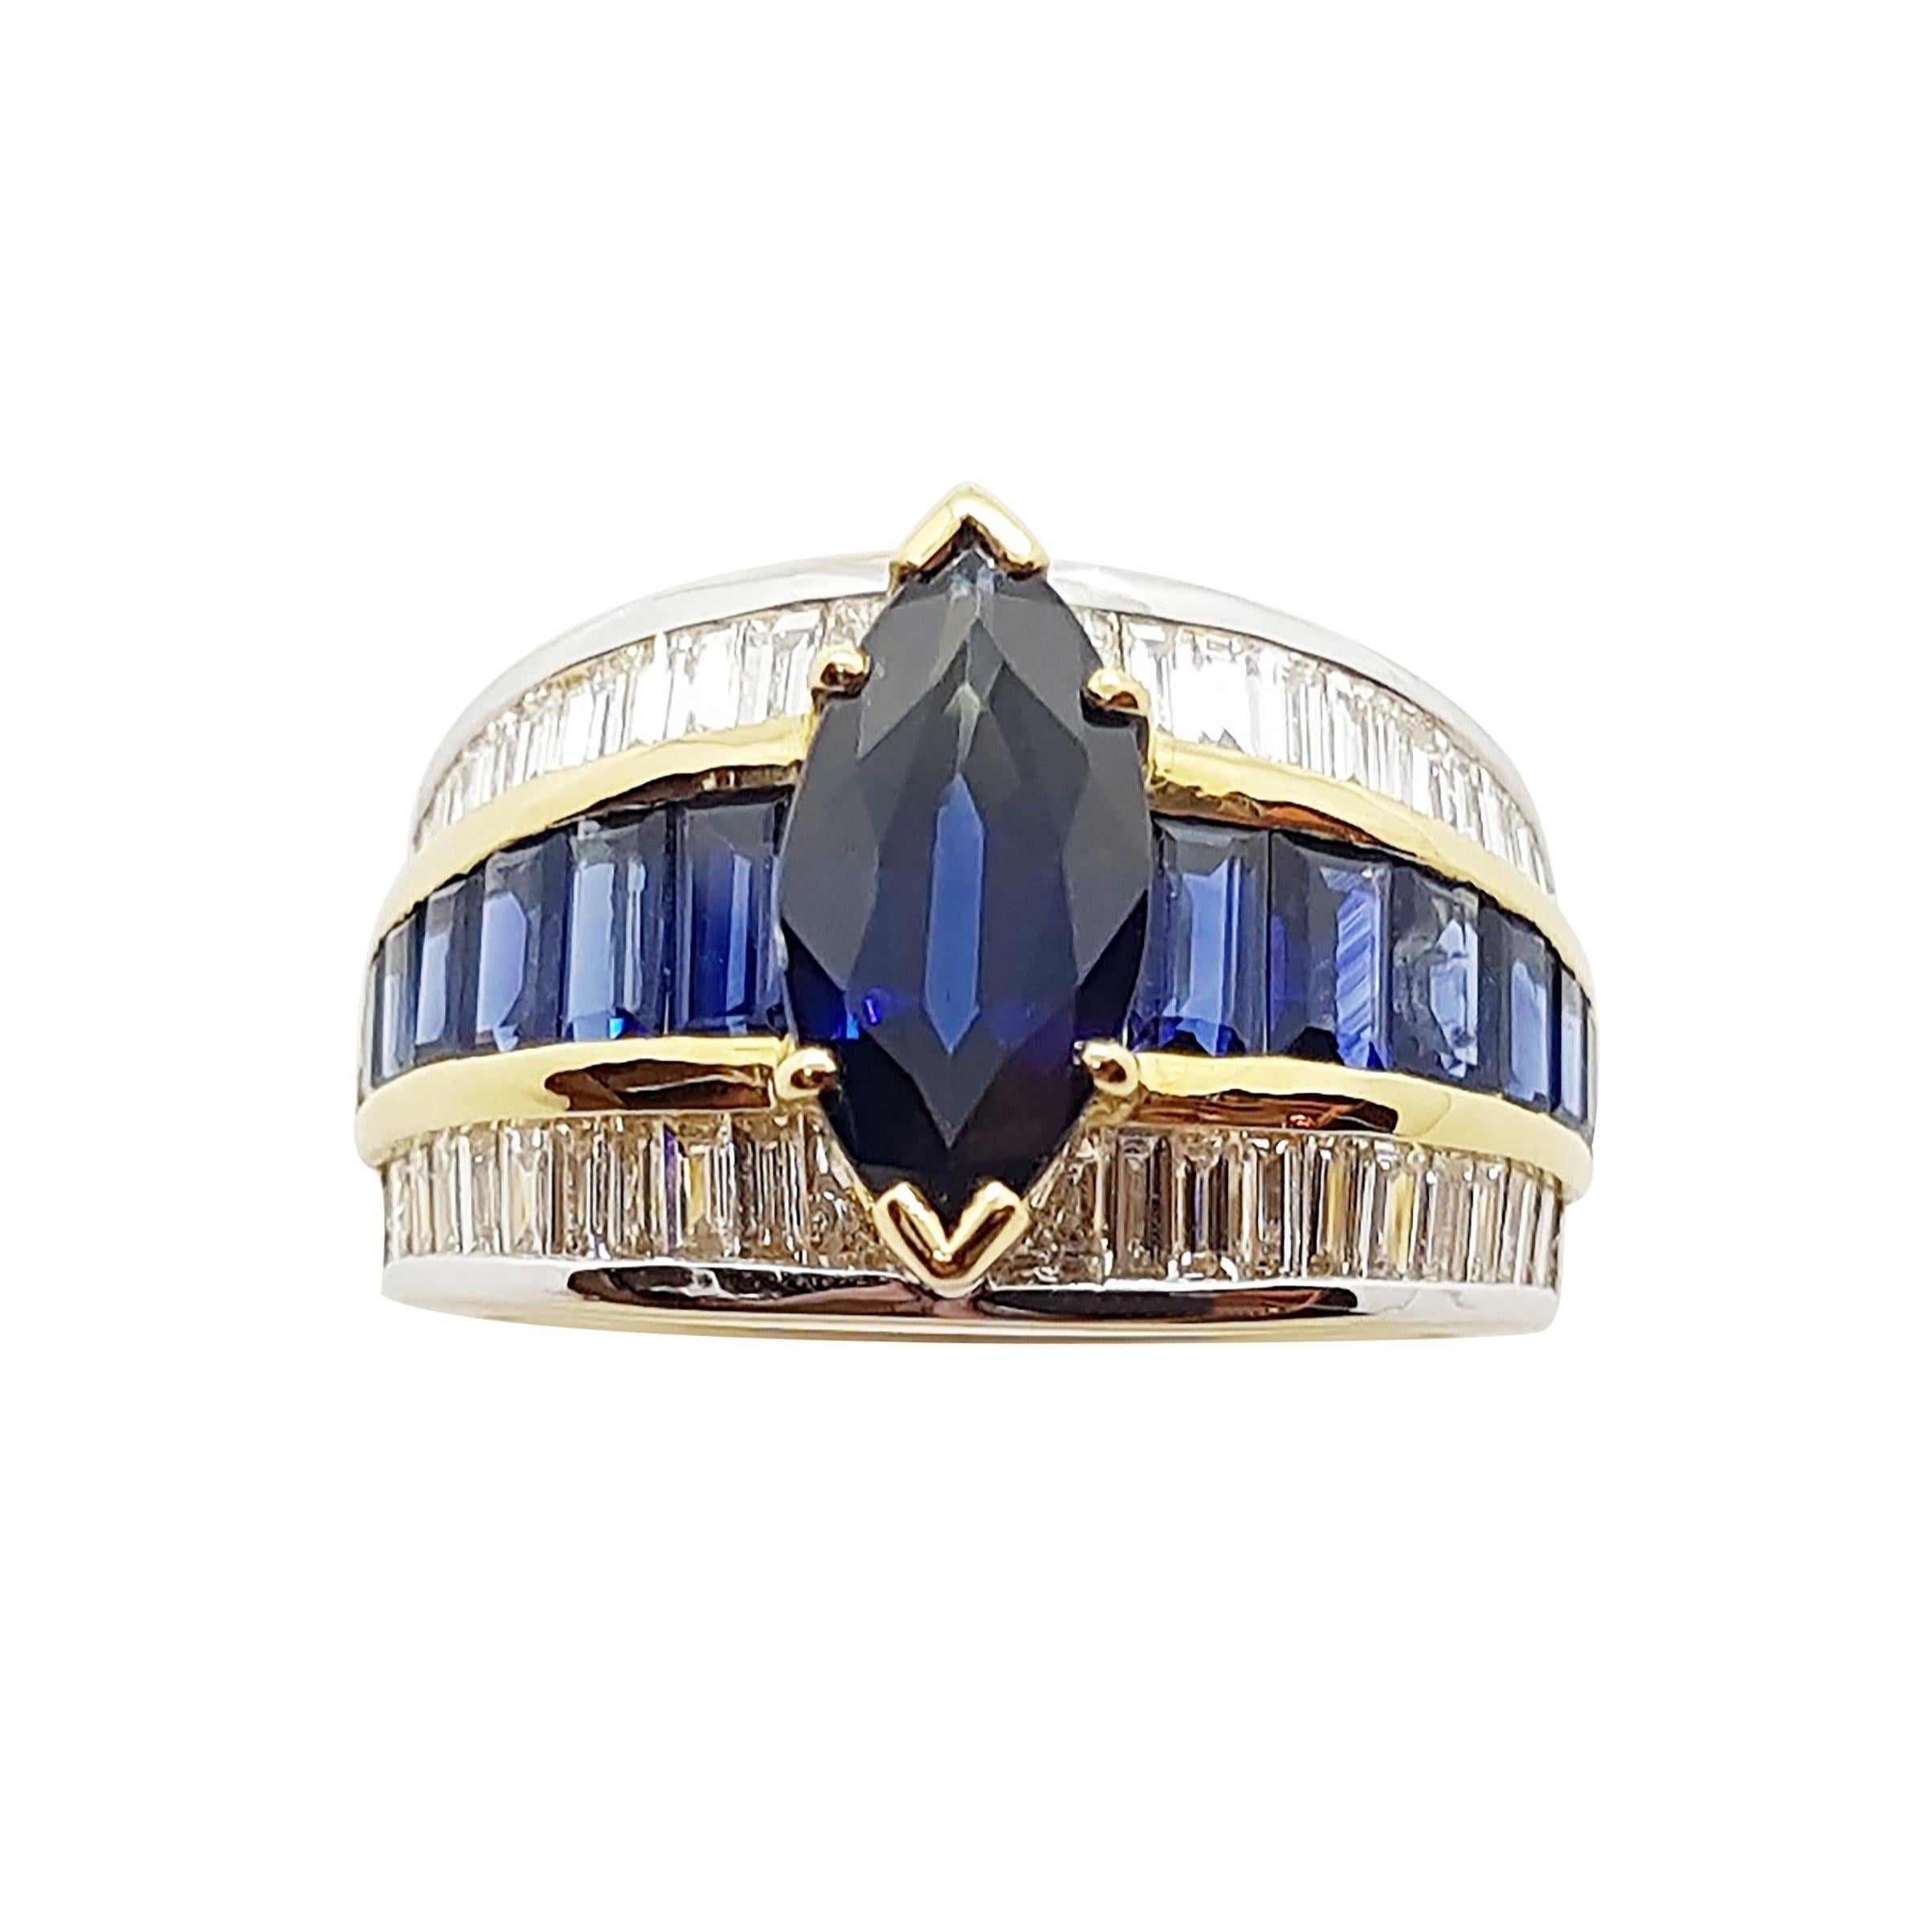 Blue Sapphire with Diamond and Blue Sapphire Ring Set in 18 Karat Gold Settings